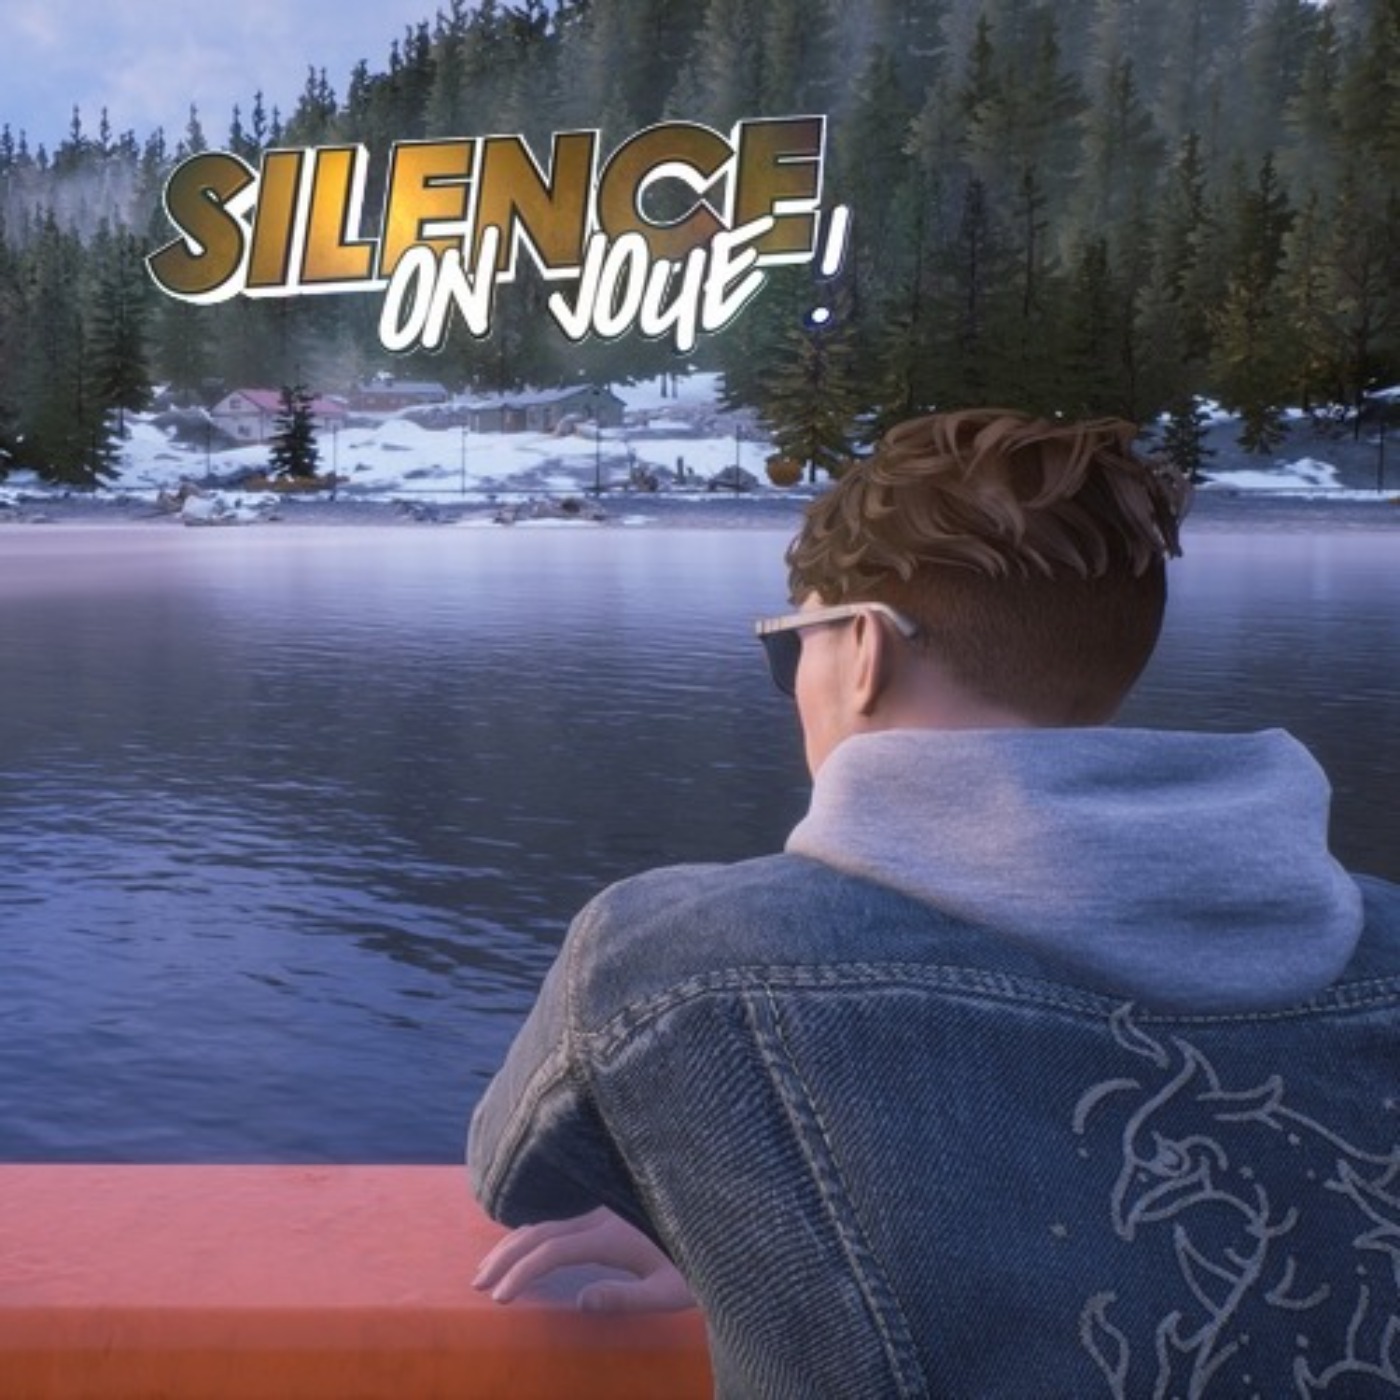 cover art for Silence on joue ! Fall Guys, Tell Me Why, There is no Game, et plein d'autres